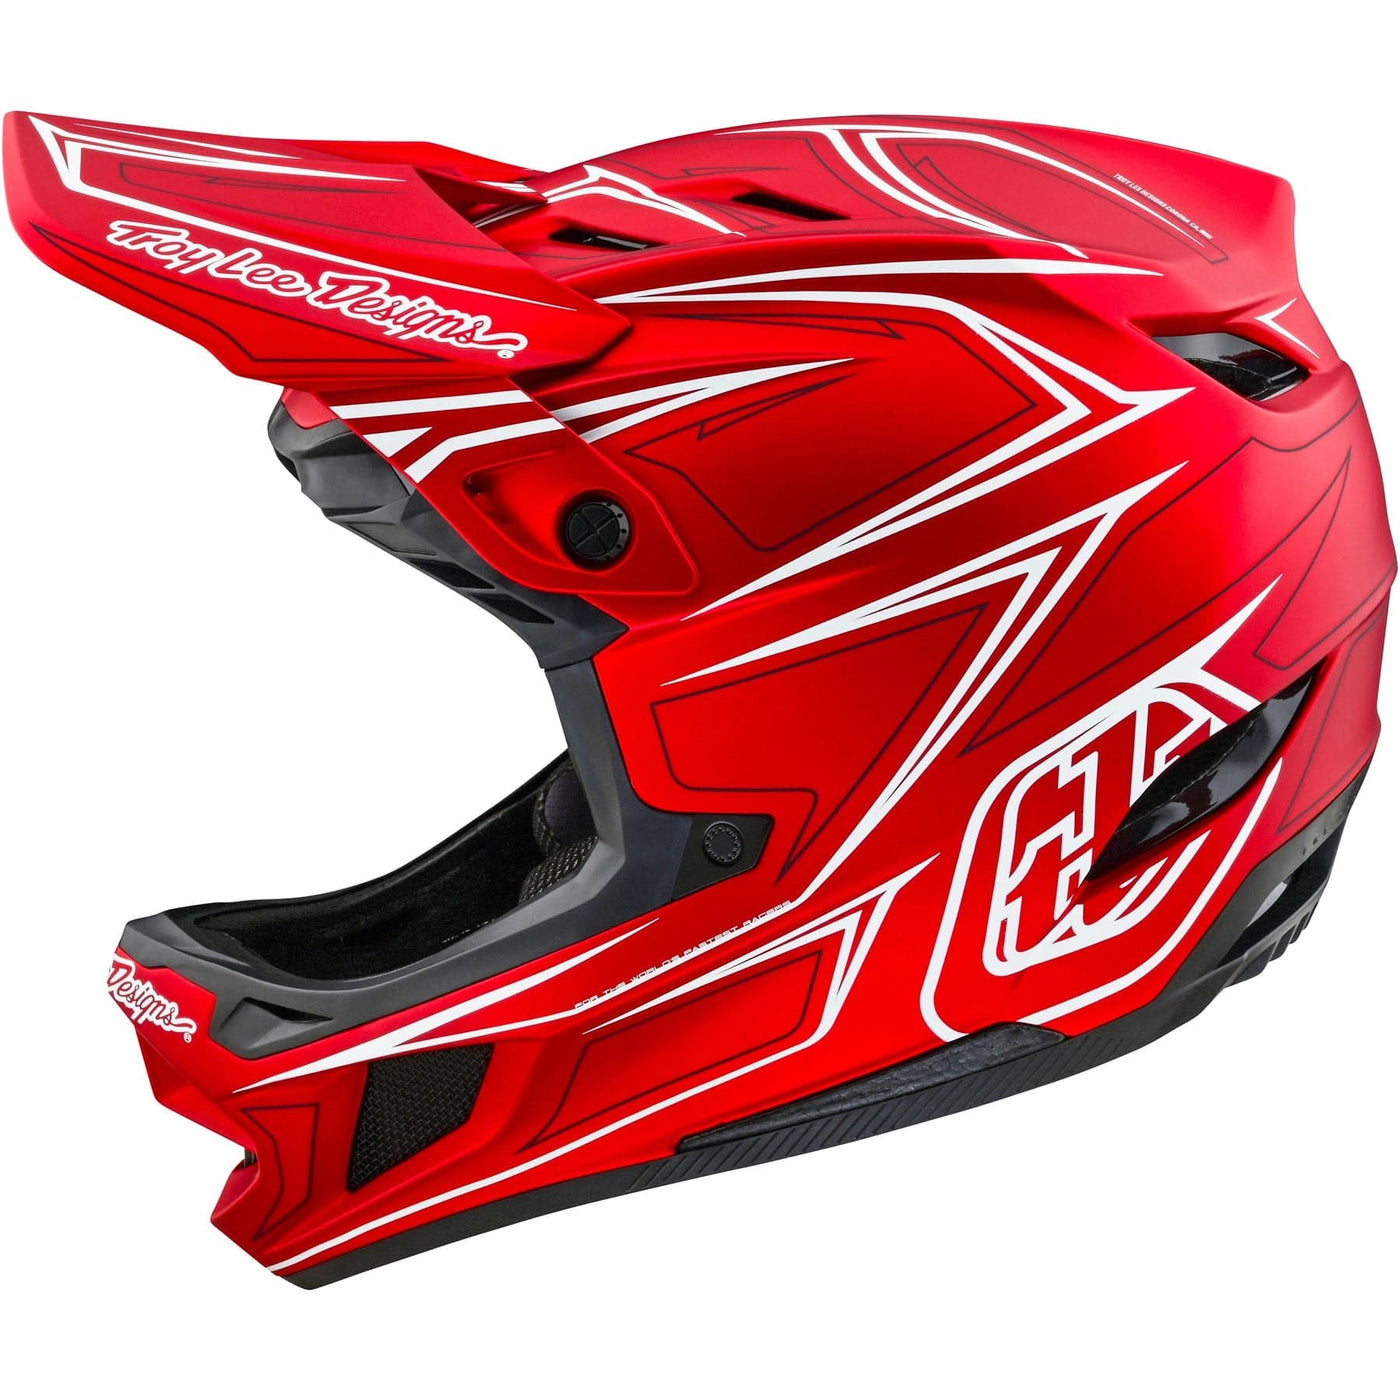 TLD D4 Composite MIPS Helmet Pinned - Red 8Lines Shop - Fast Shipping